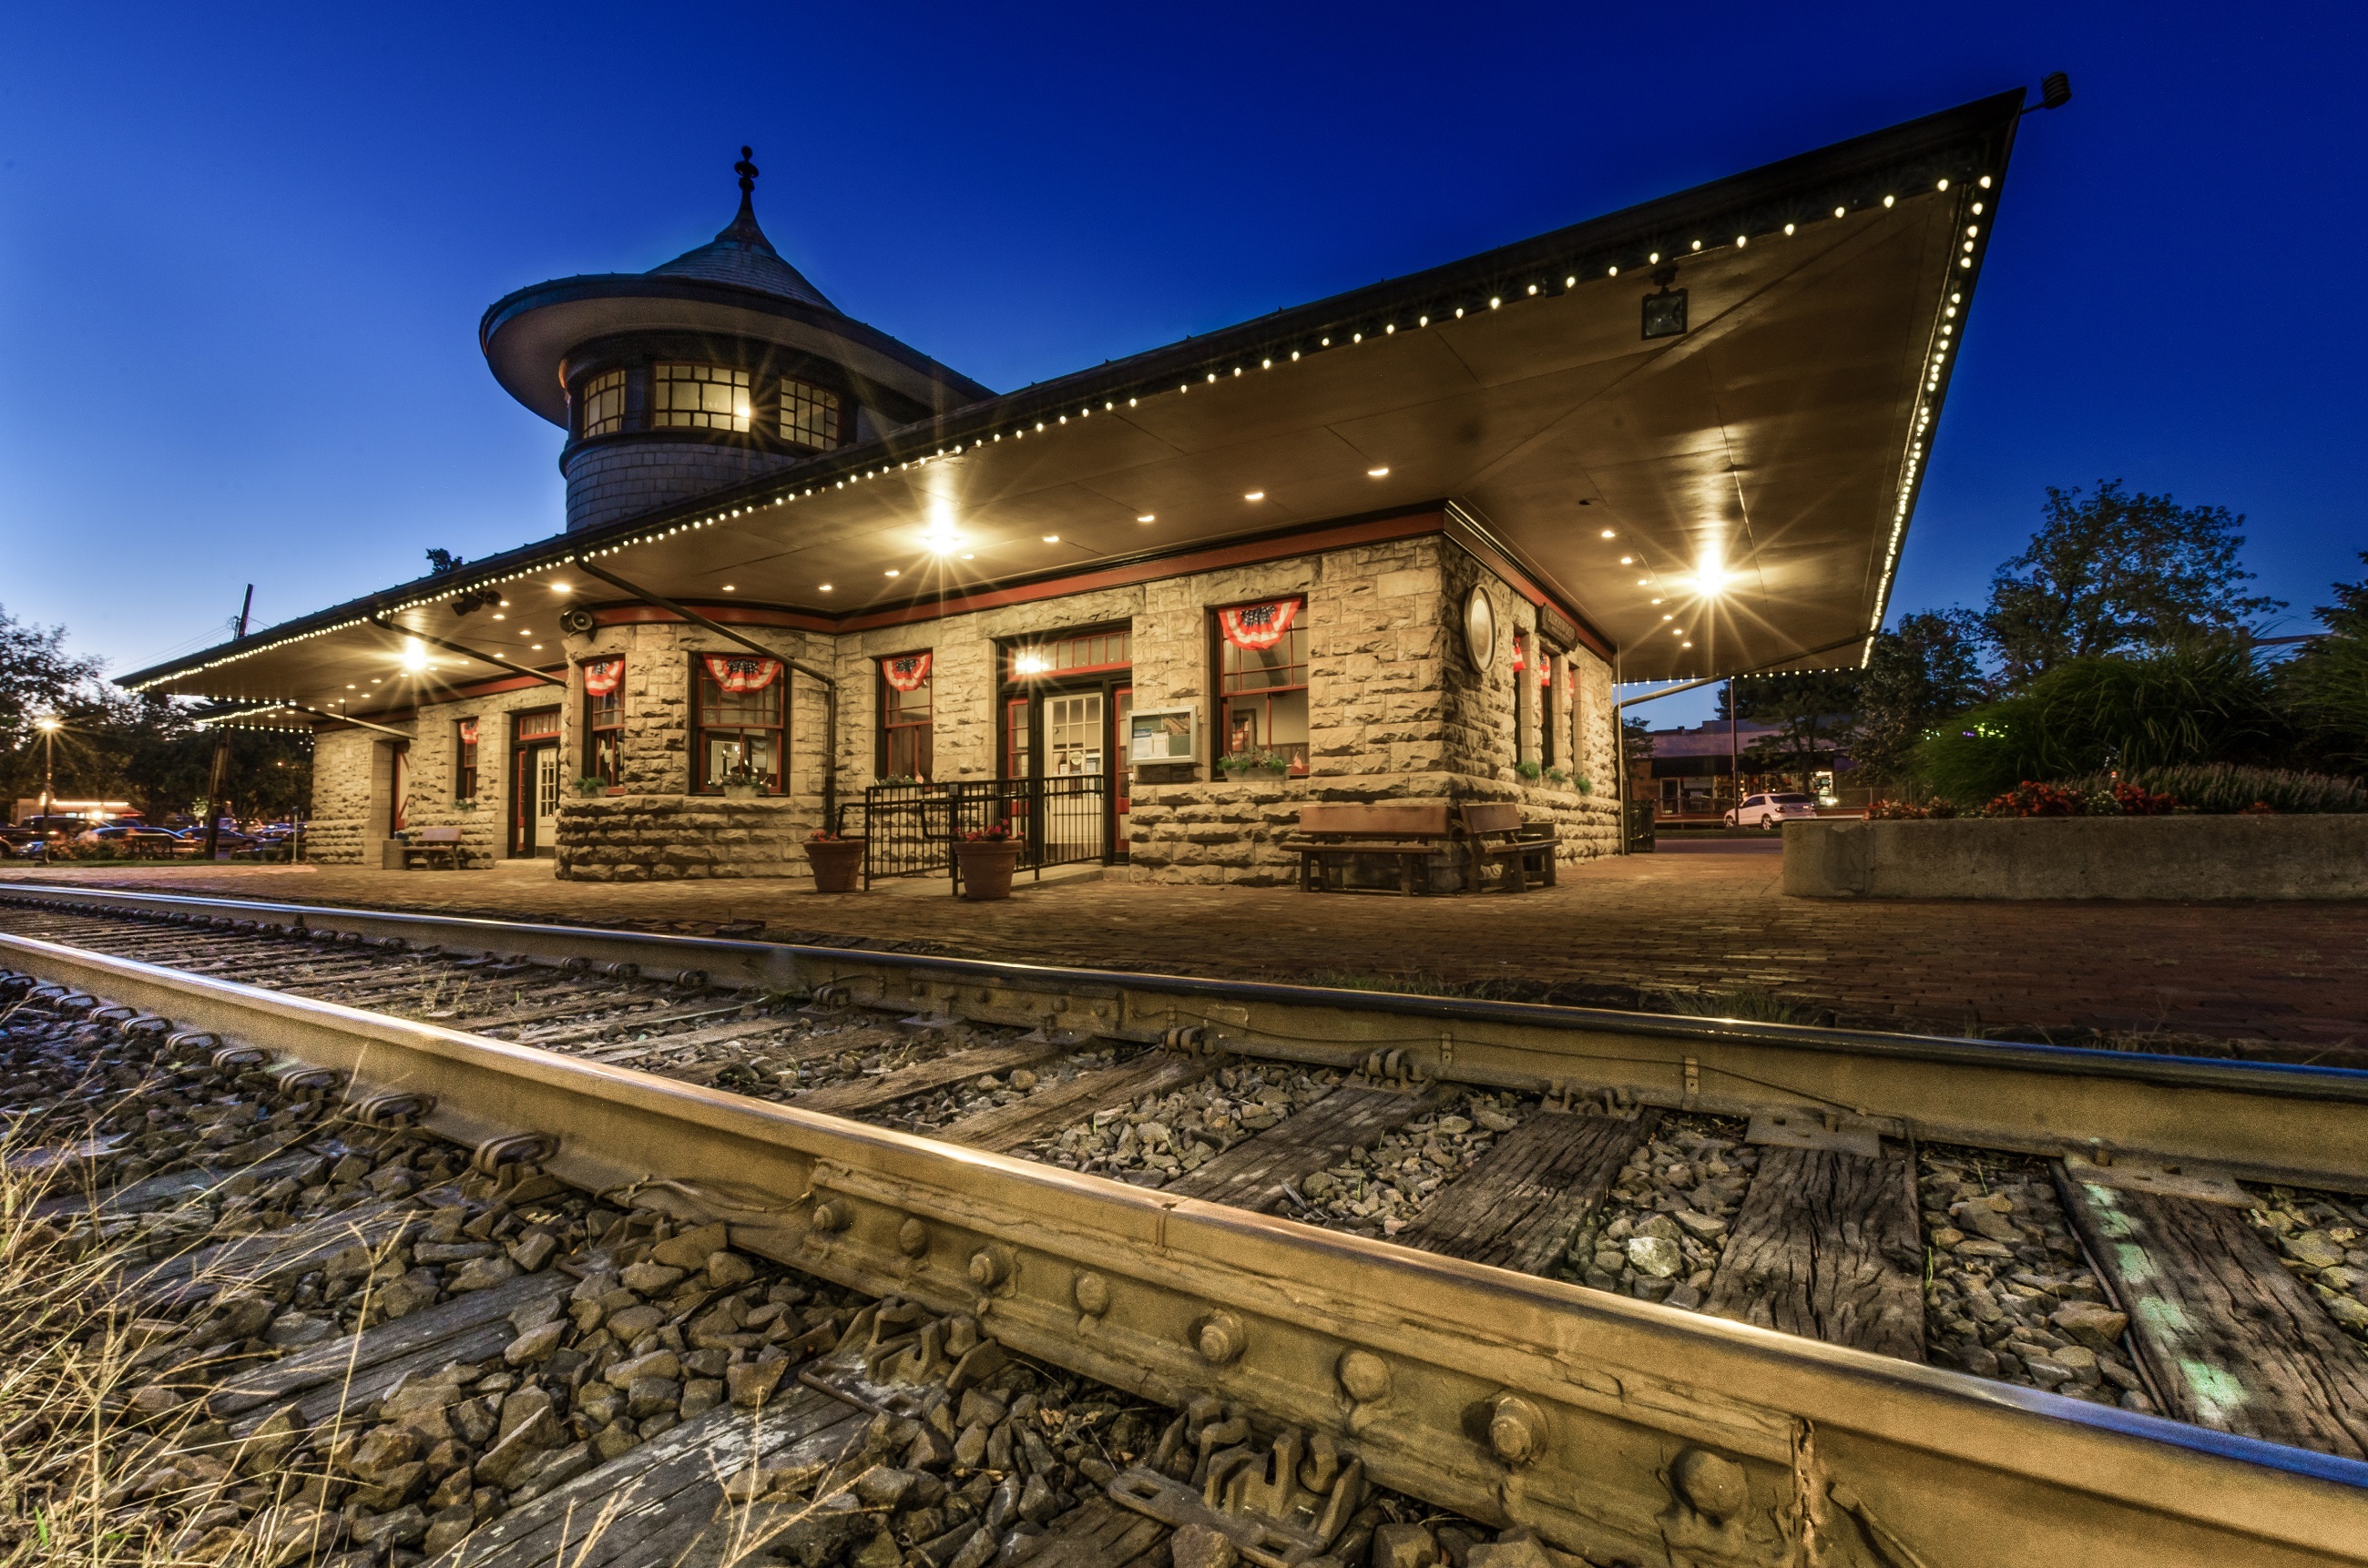 Train station at night time by skeeze